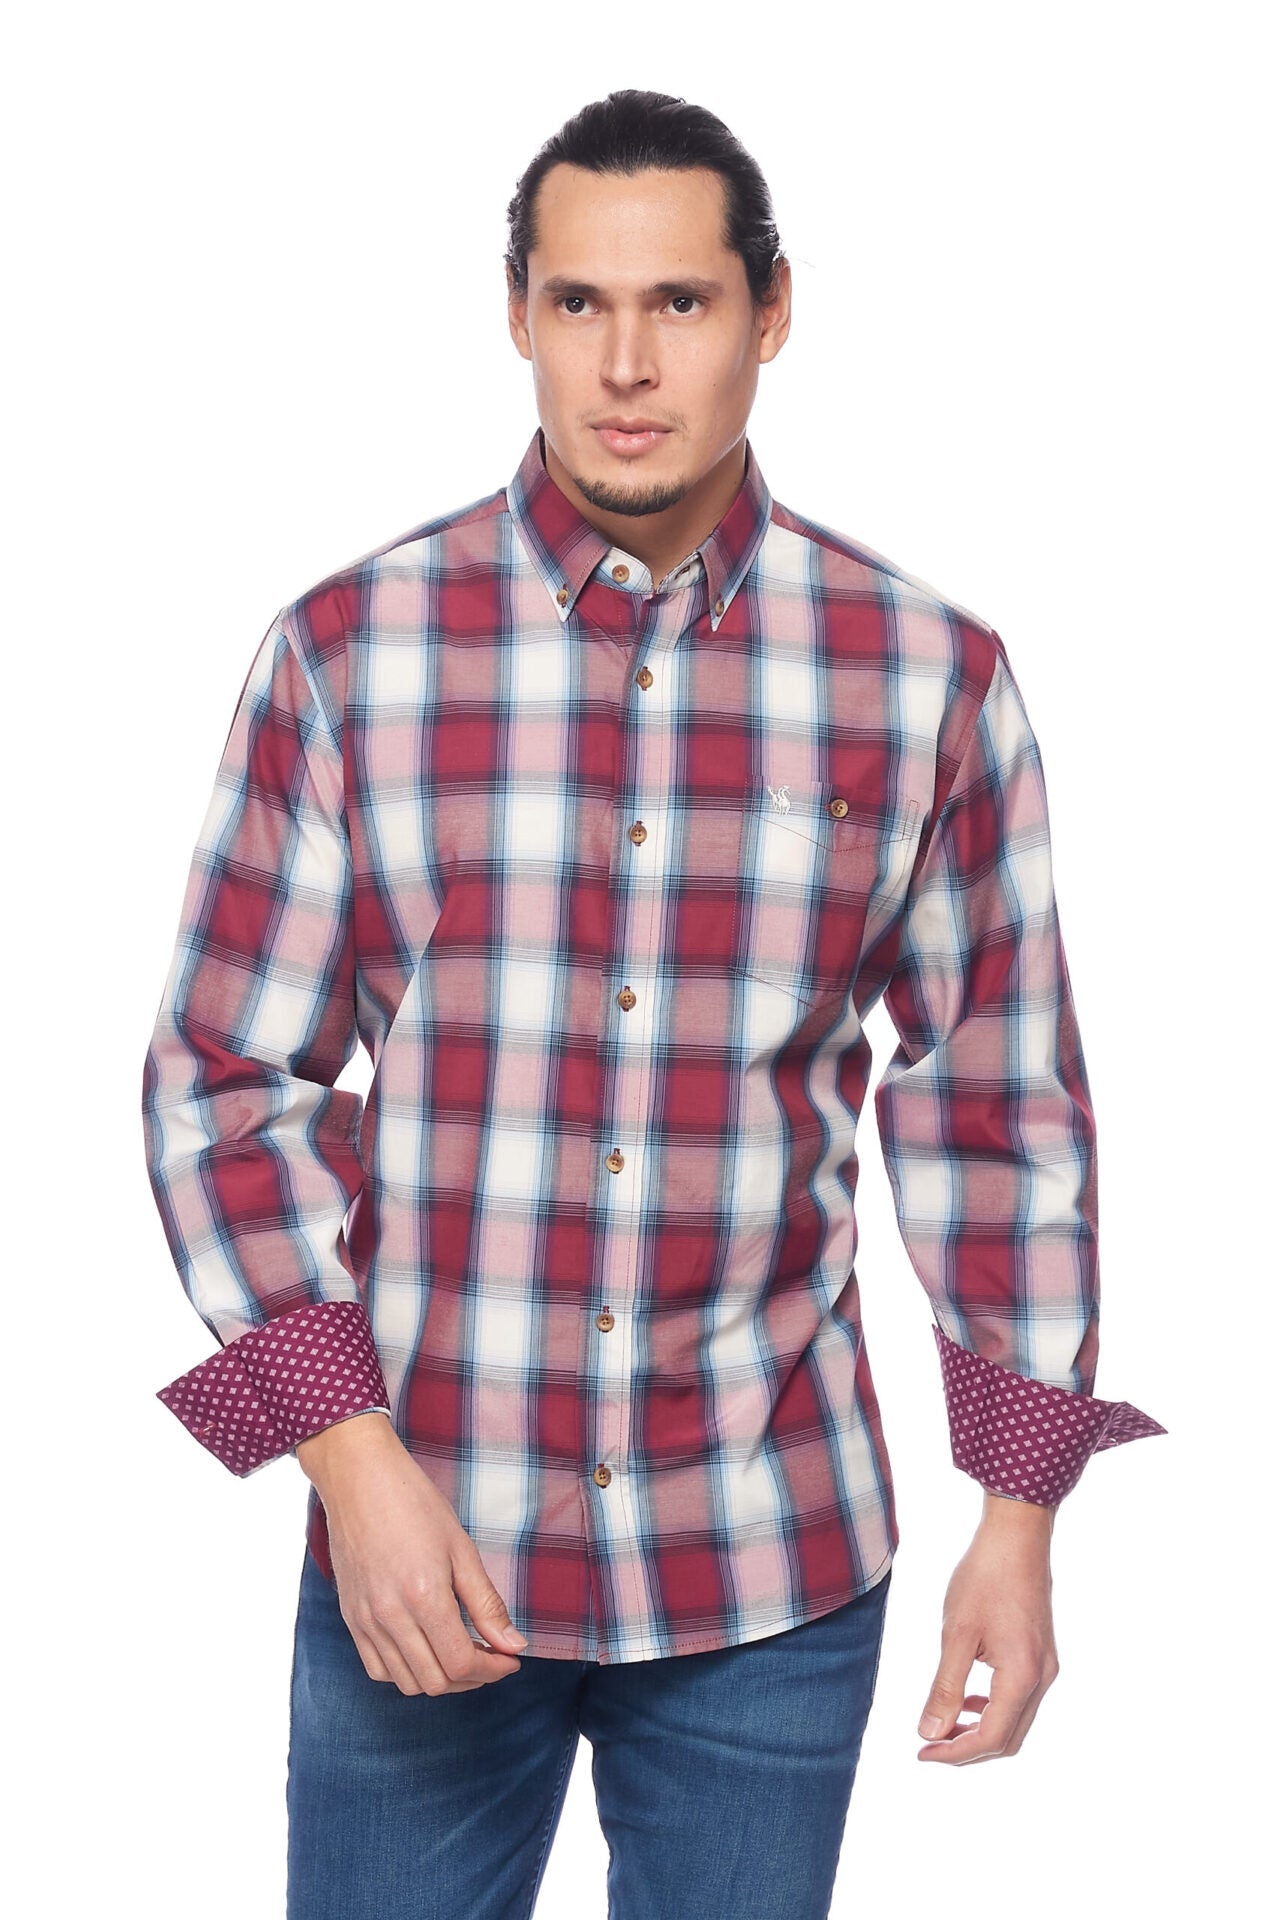 BUTTON-DOWN Men's Western Long Sleeve, 100% Cotton Plaid Shirts With Snap ButtonsS – With Logo